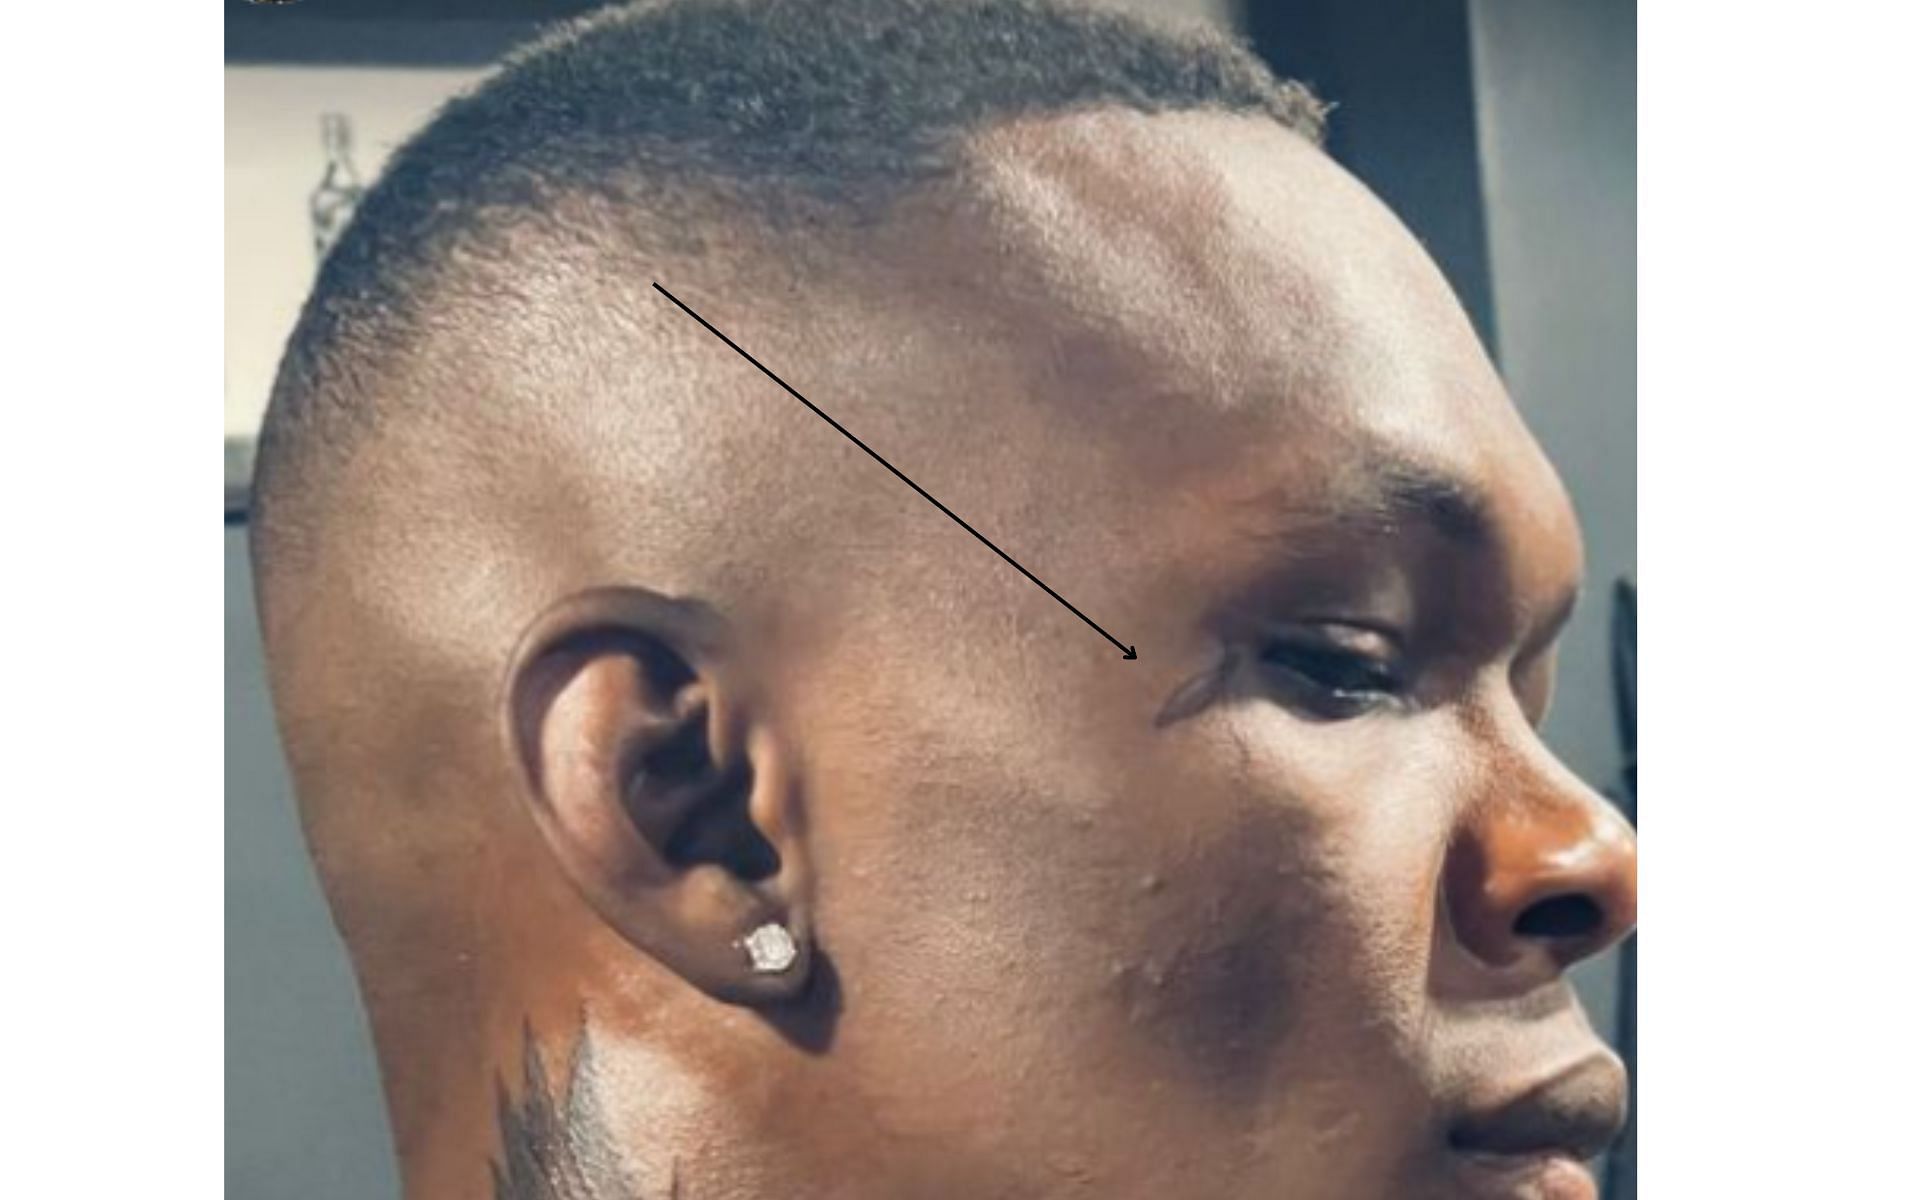 3. What Does Israel Adesanya's Face Tattoo Mean? - wide 1